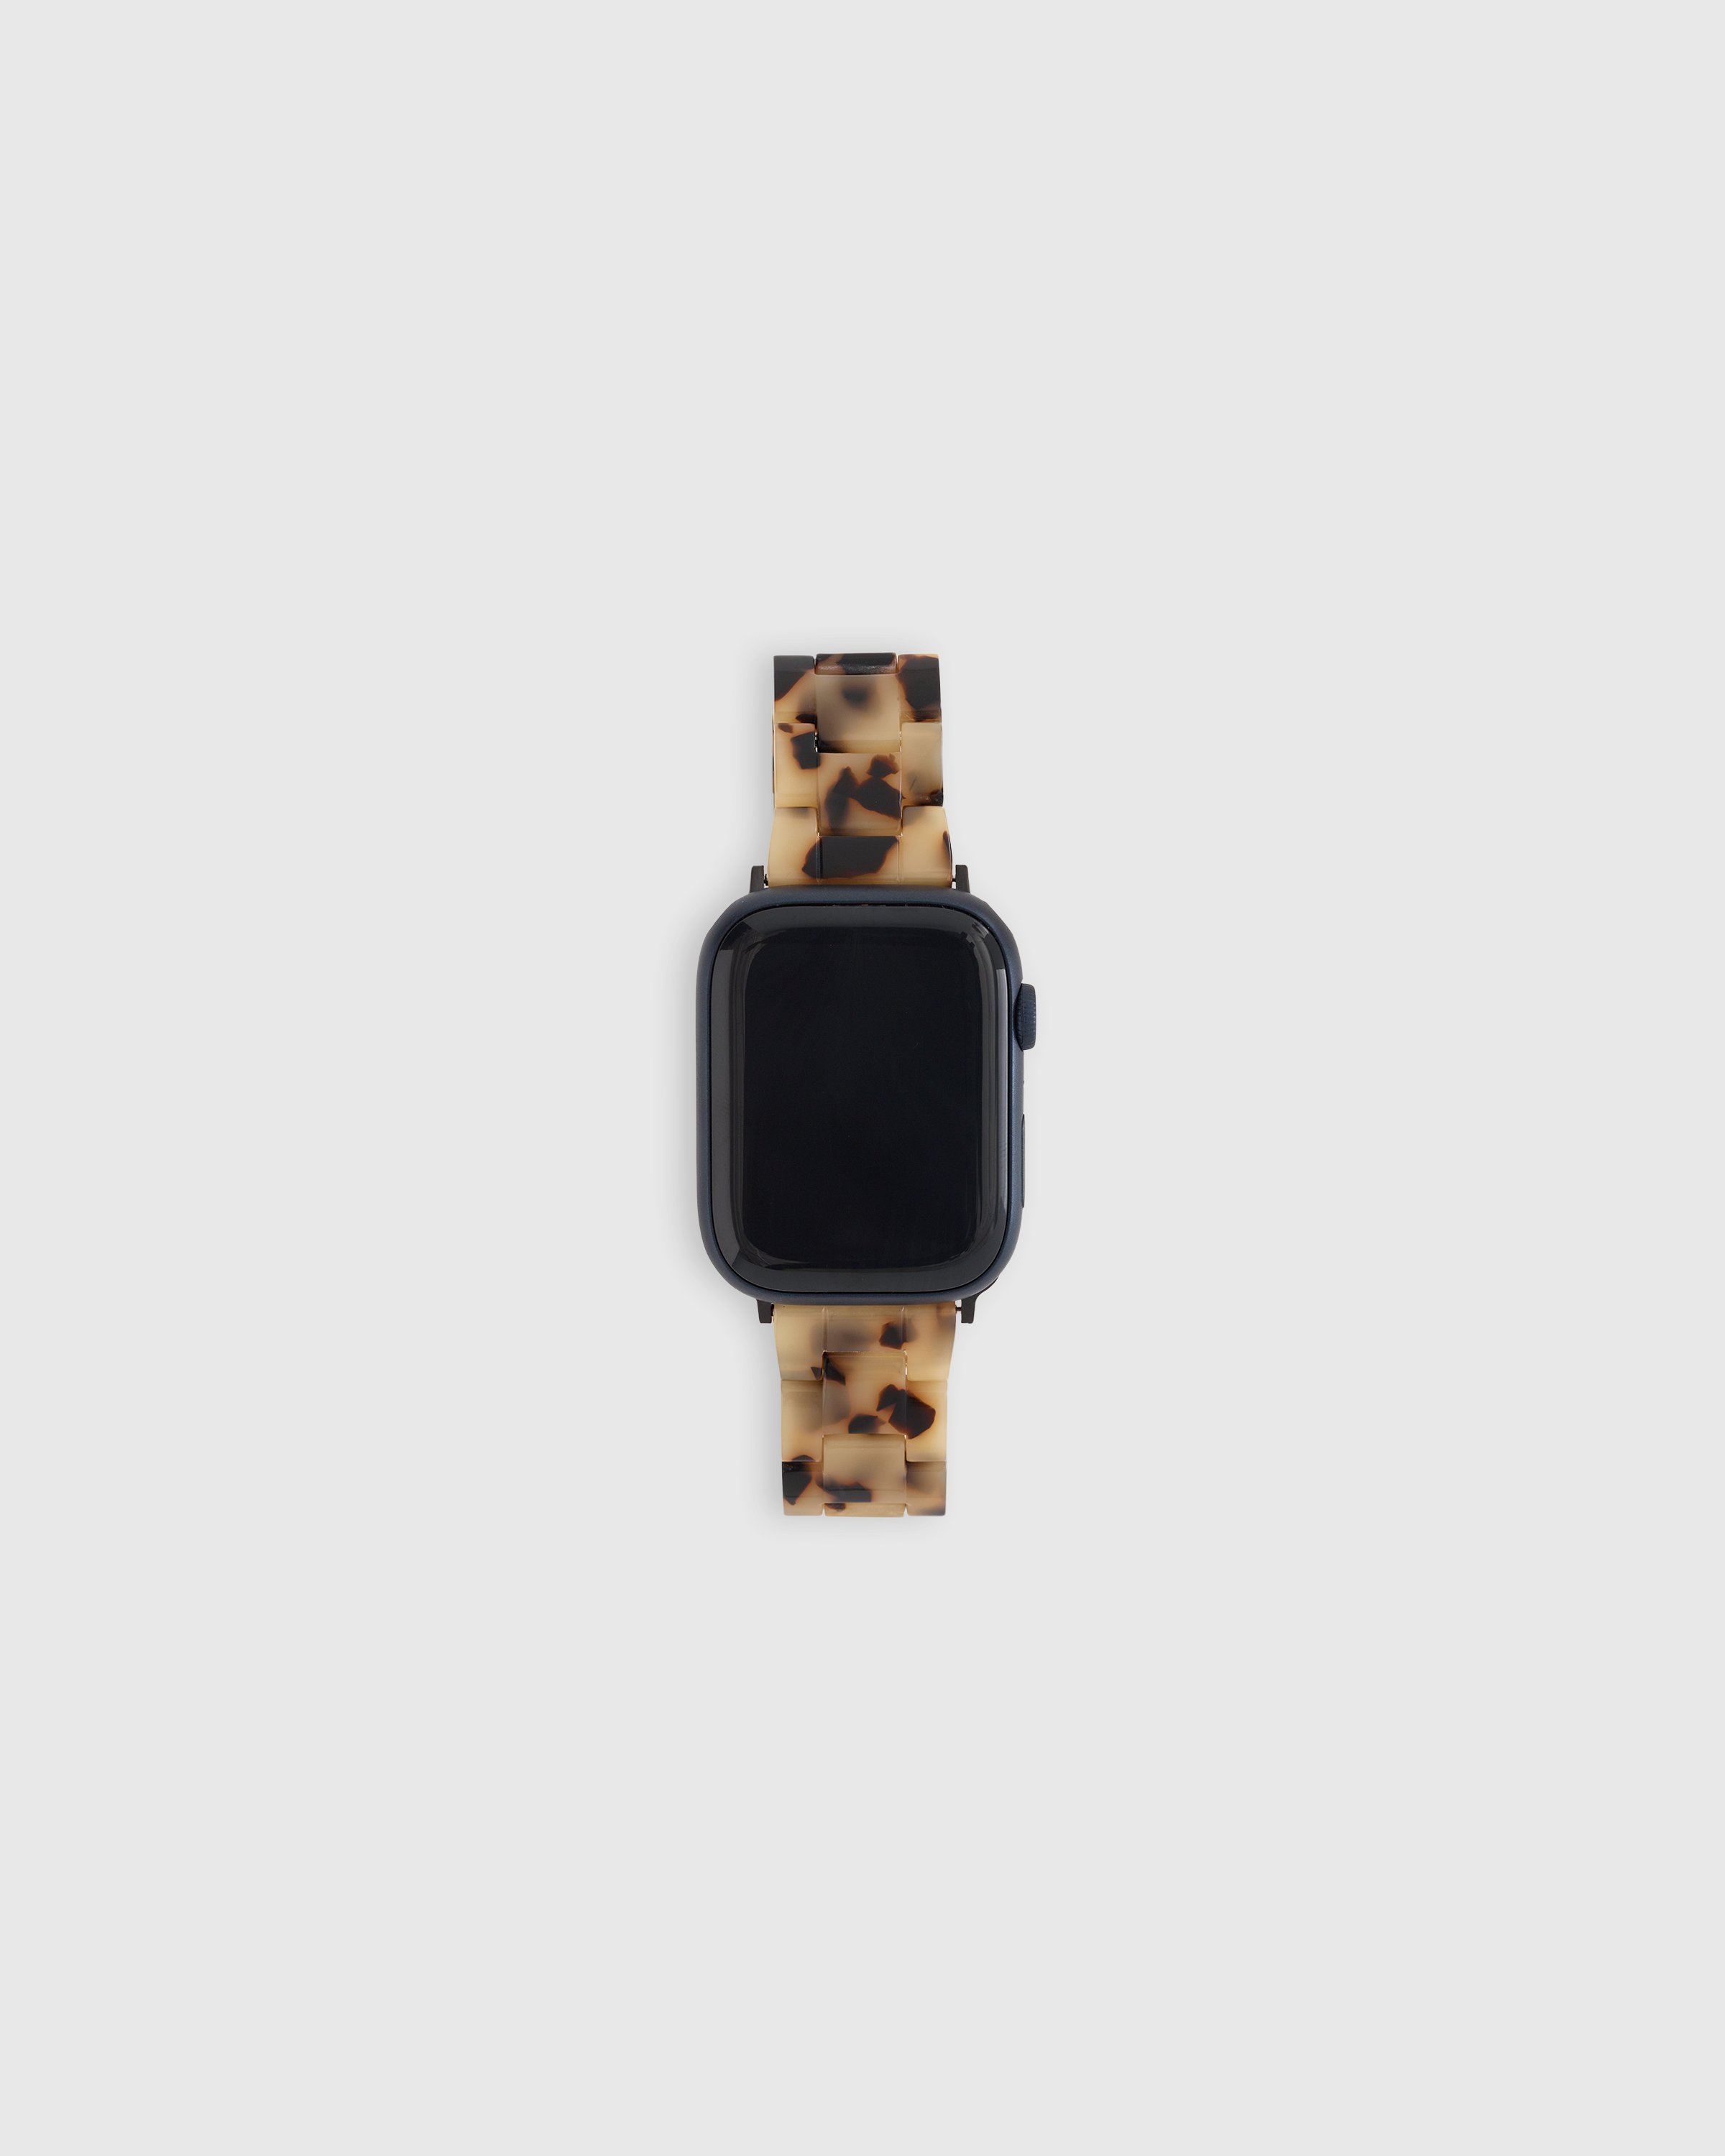 Quince Acetate Apple Watch Band In Tan Tortoise